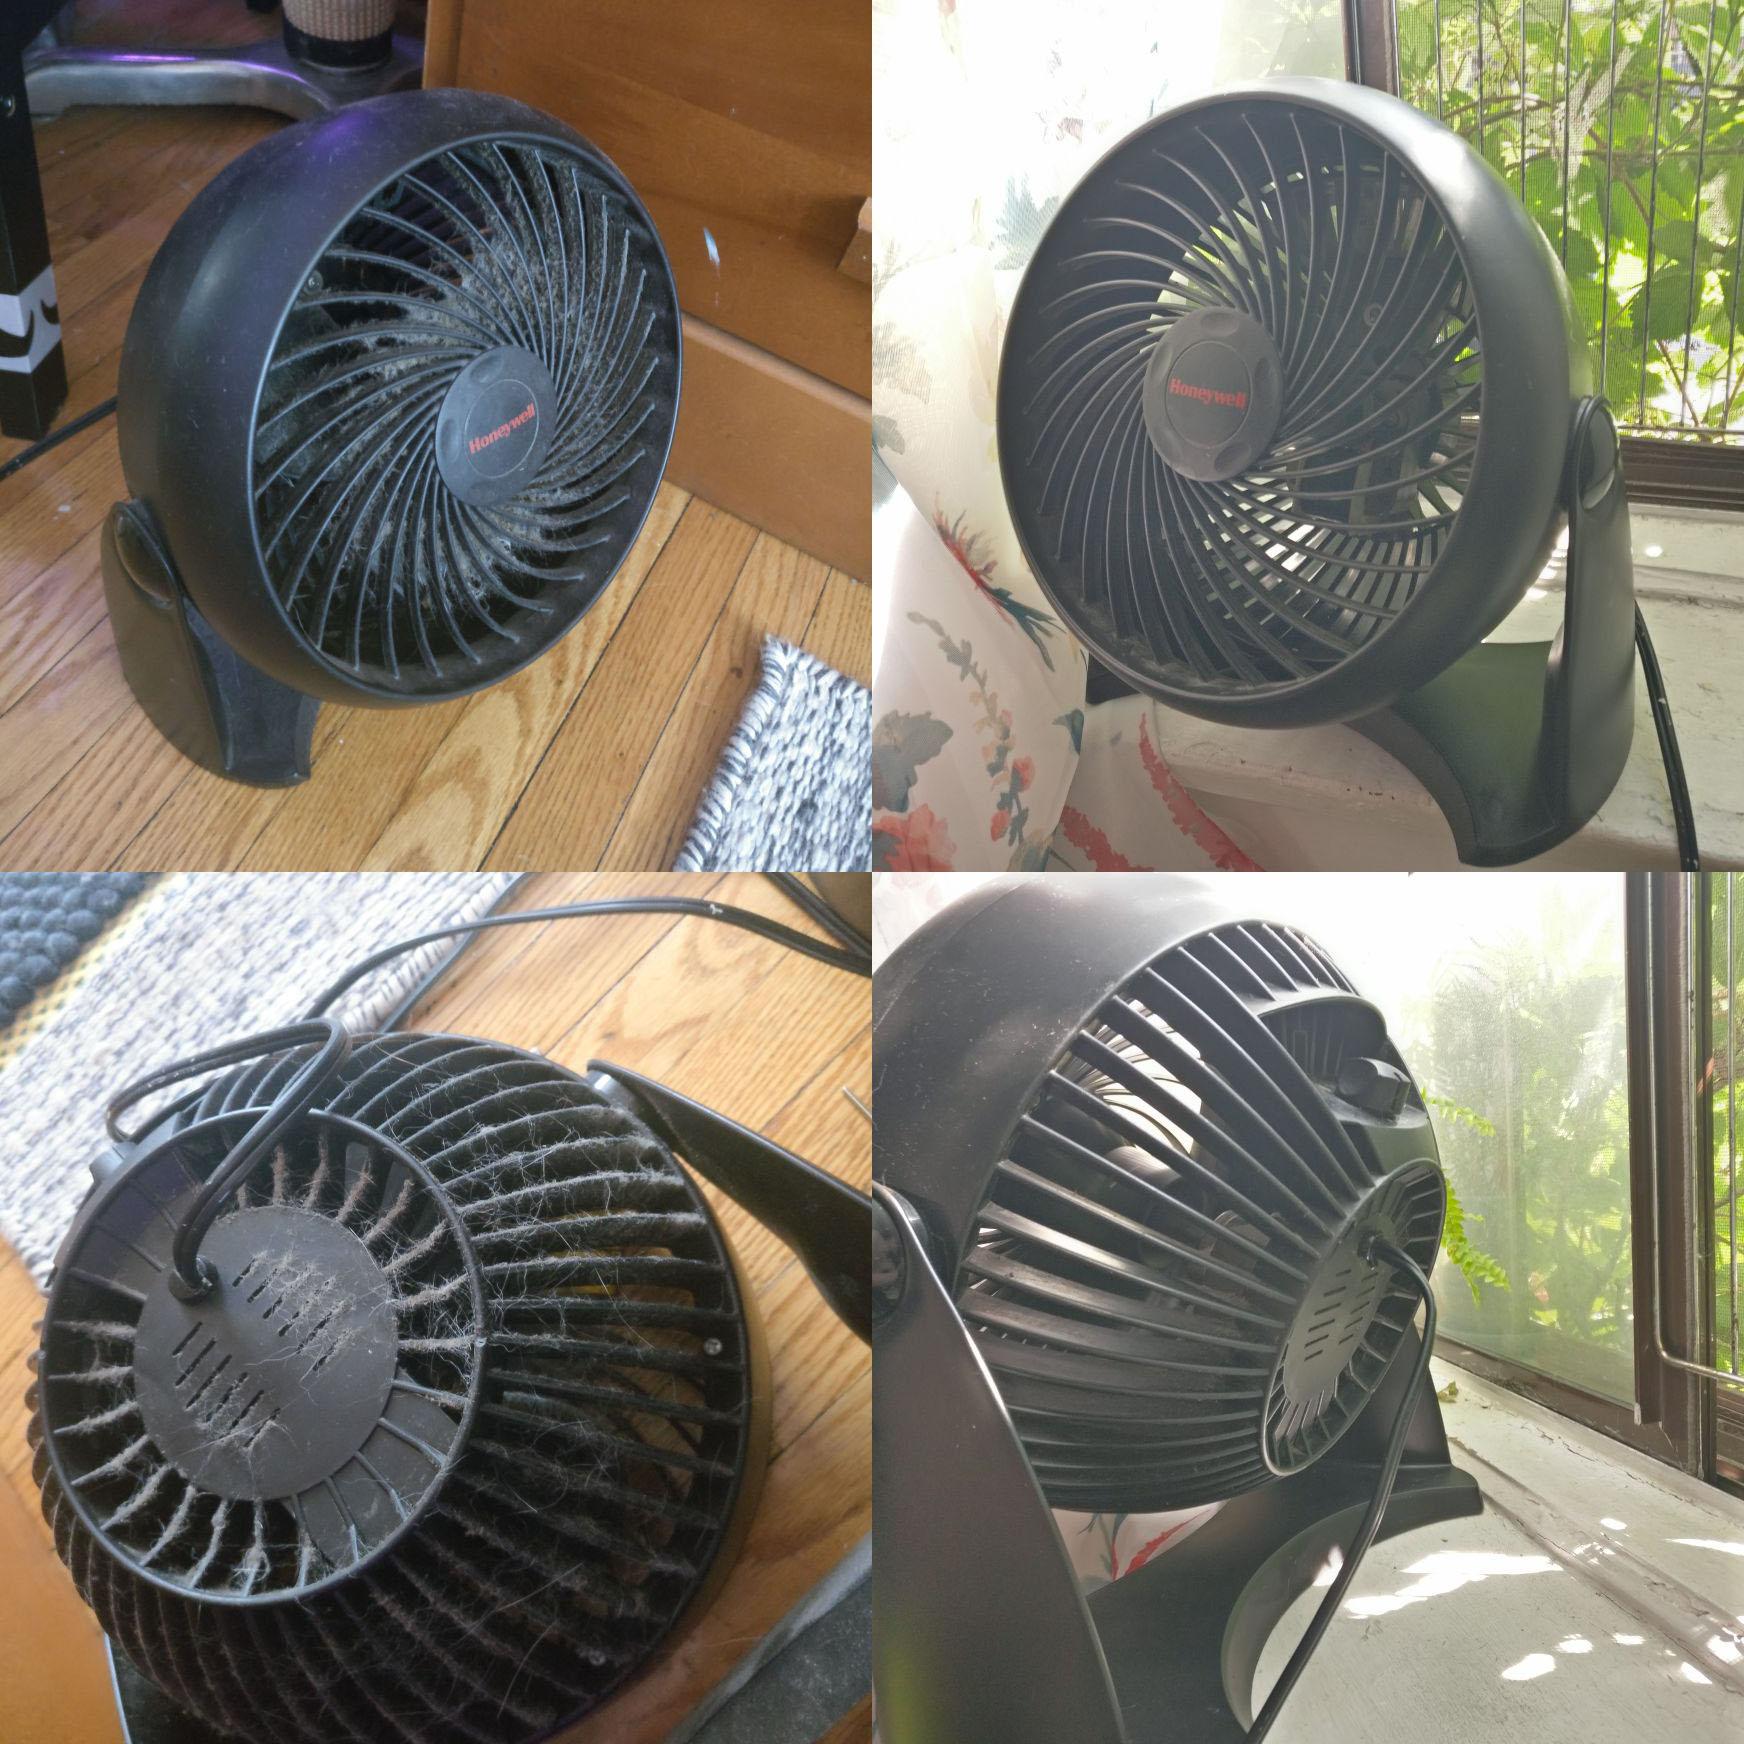 Clean the fan and surrounding components using compressed air
Replace the fan if bearing issues persist